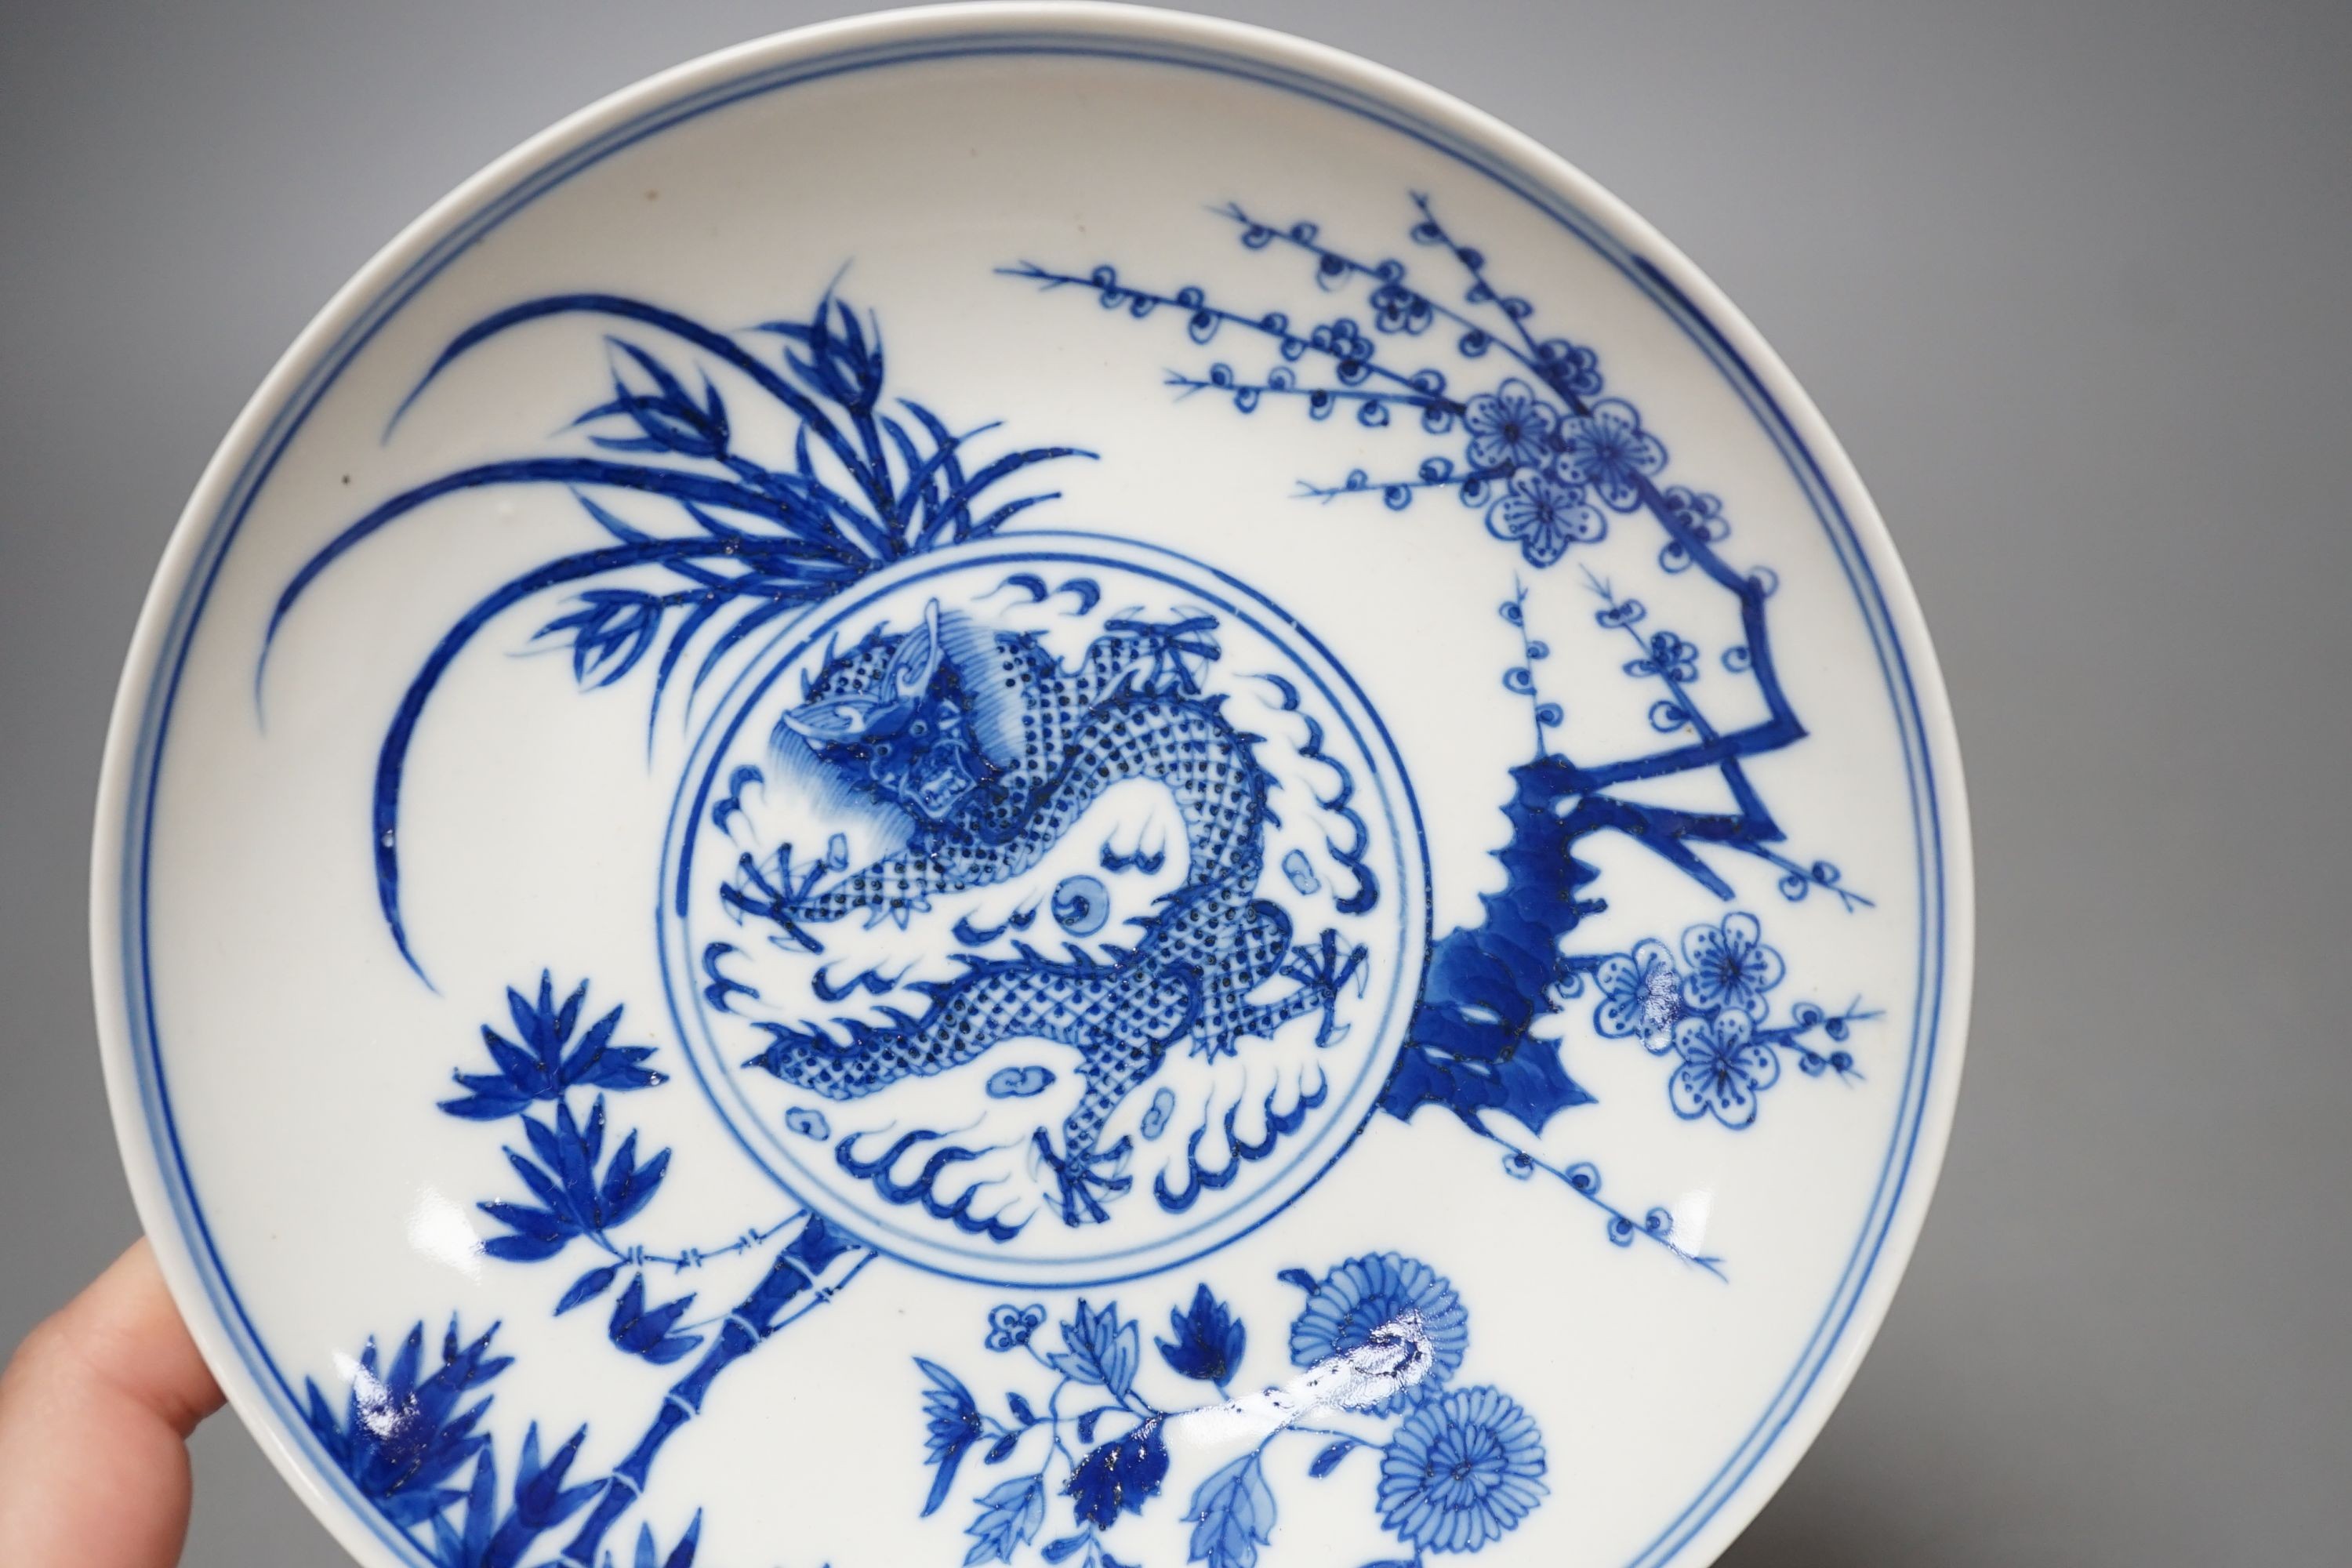 A blue and white Chinese dragon dish - 16.5cm diameter